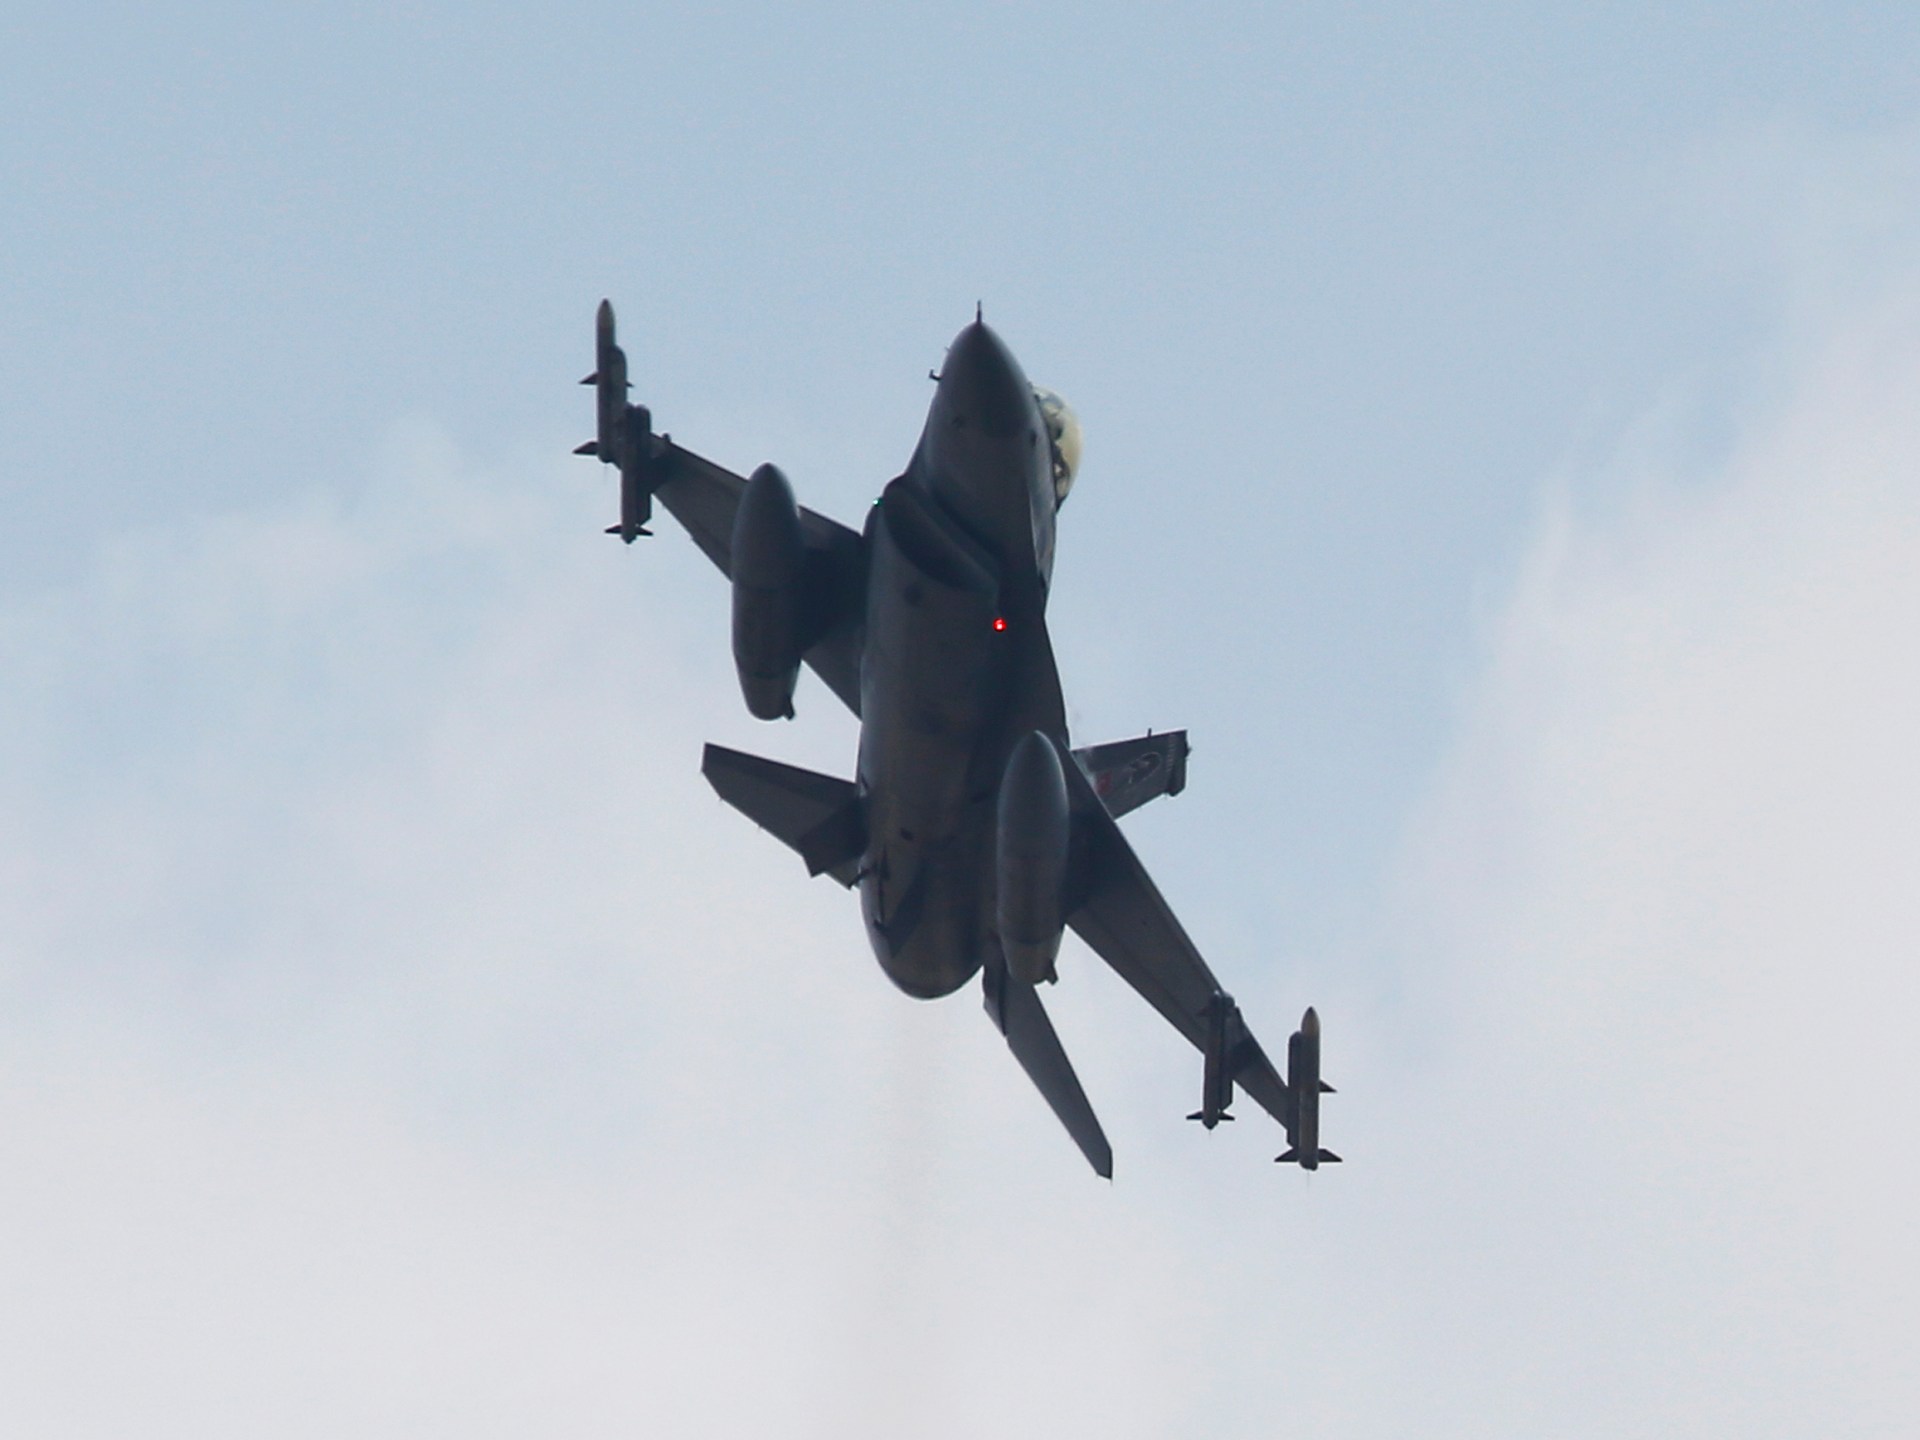 Russia: Giving F-16 fighter jets to Ukraine a ‘colossal risk’ | Russia-Ukraine war News